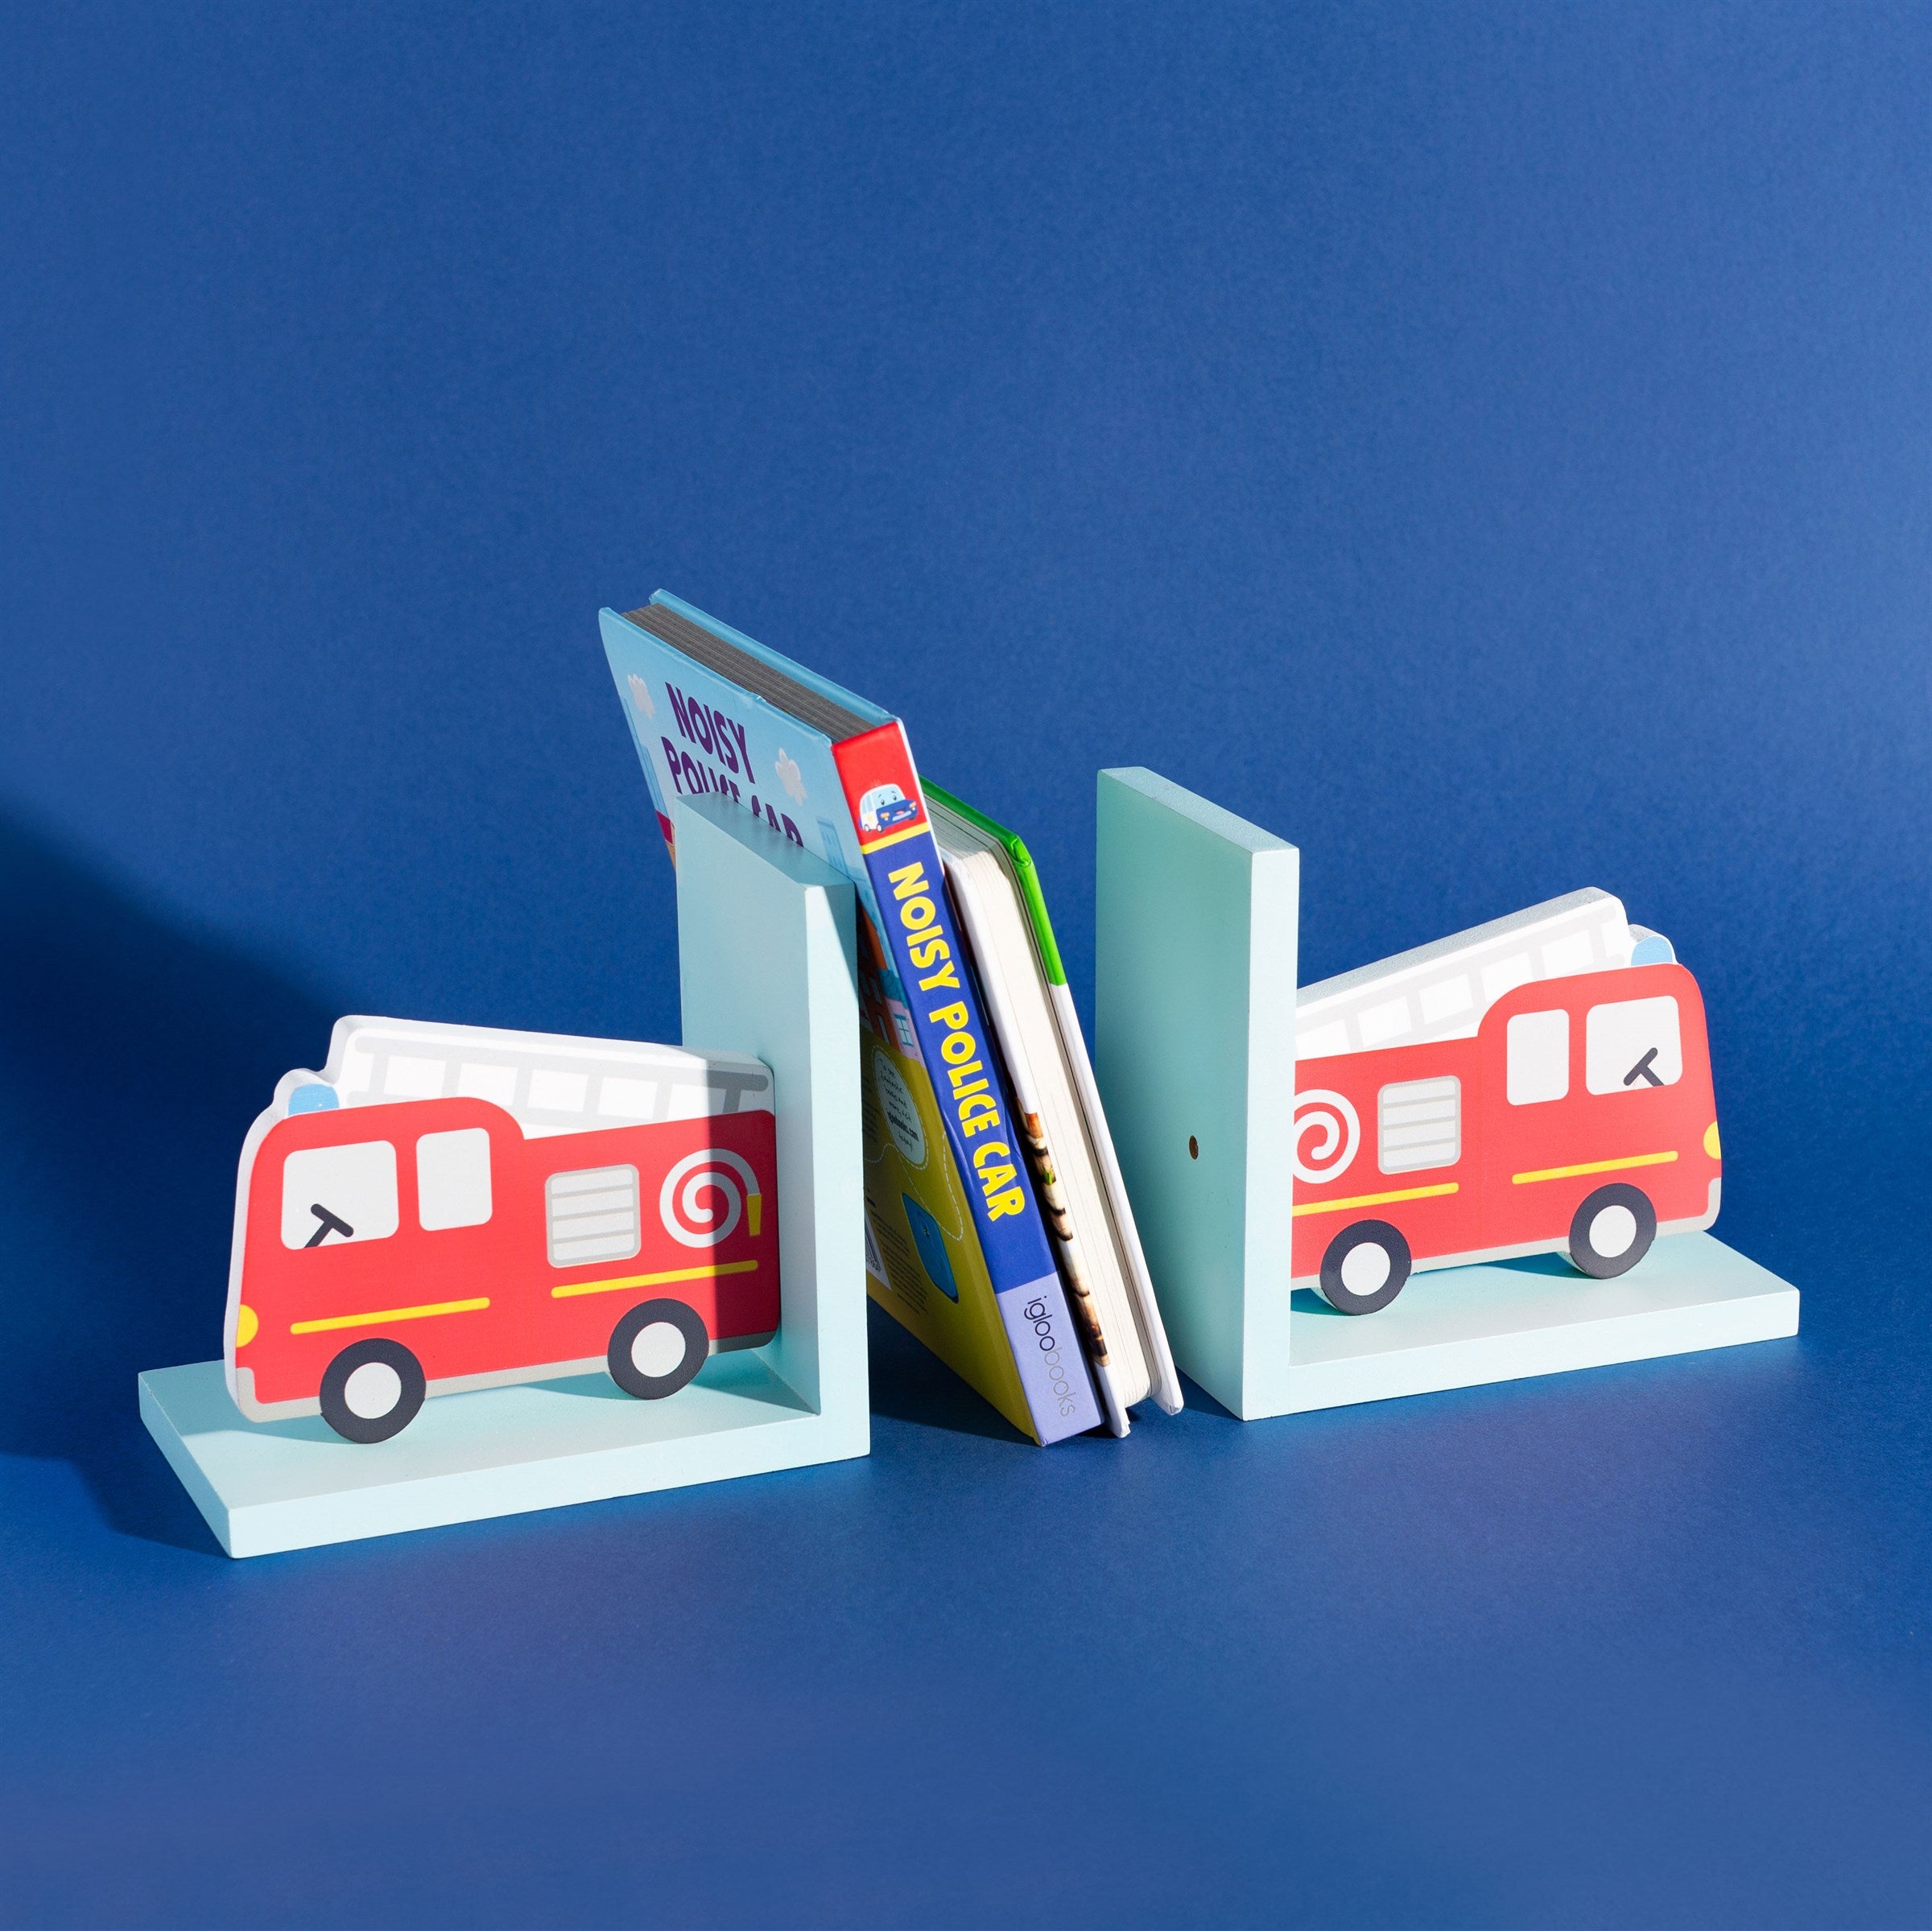 Fire engine bookends